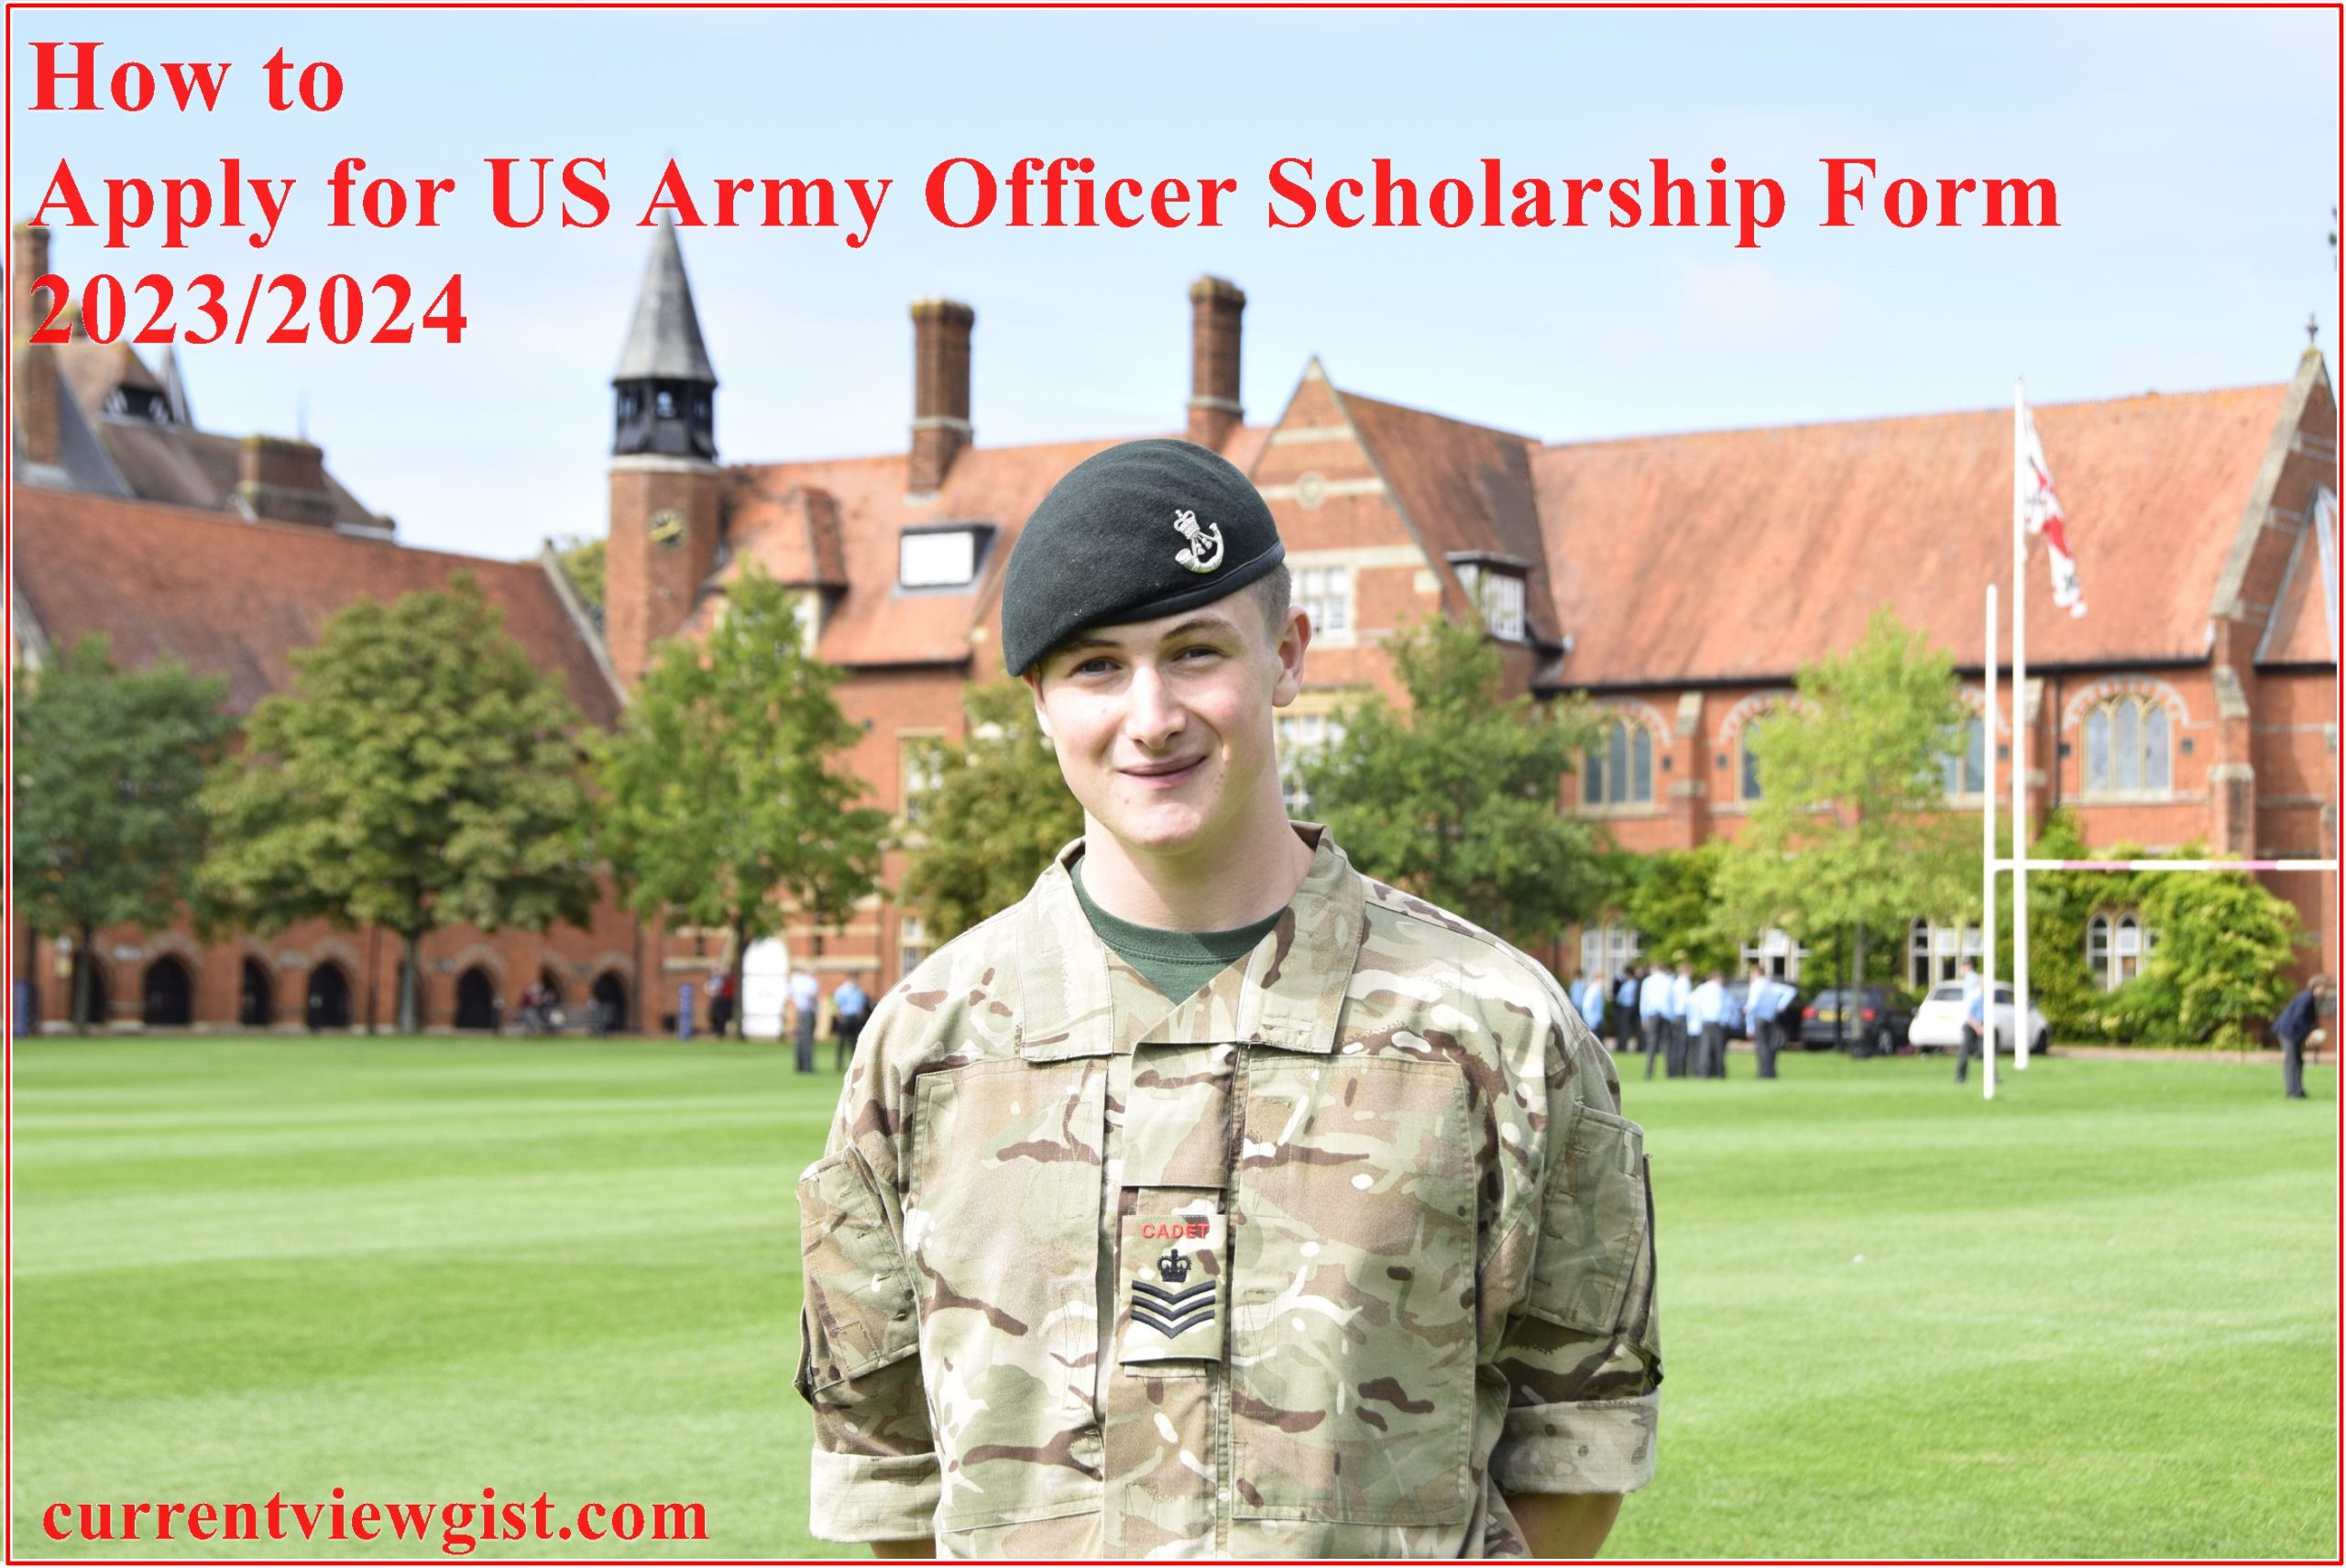 How to Apply for US Army Officer Scholarship Form 2023/2024